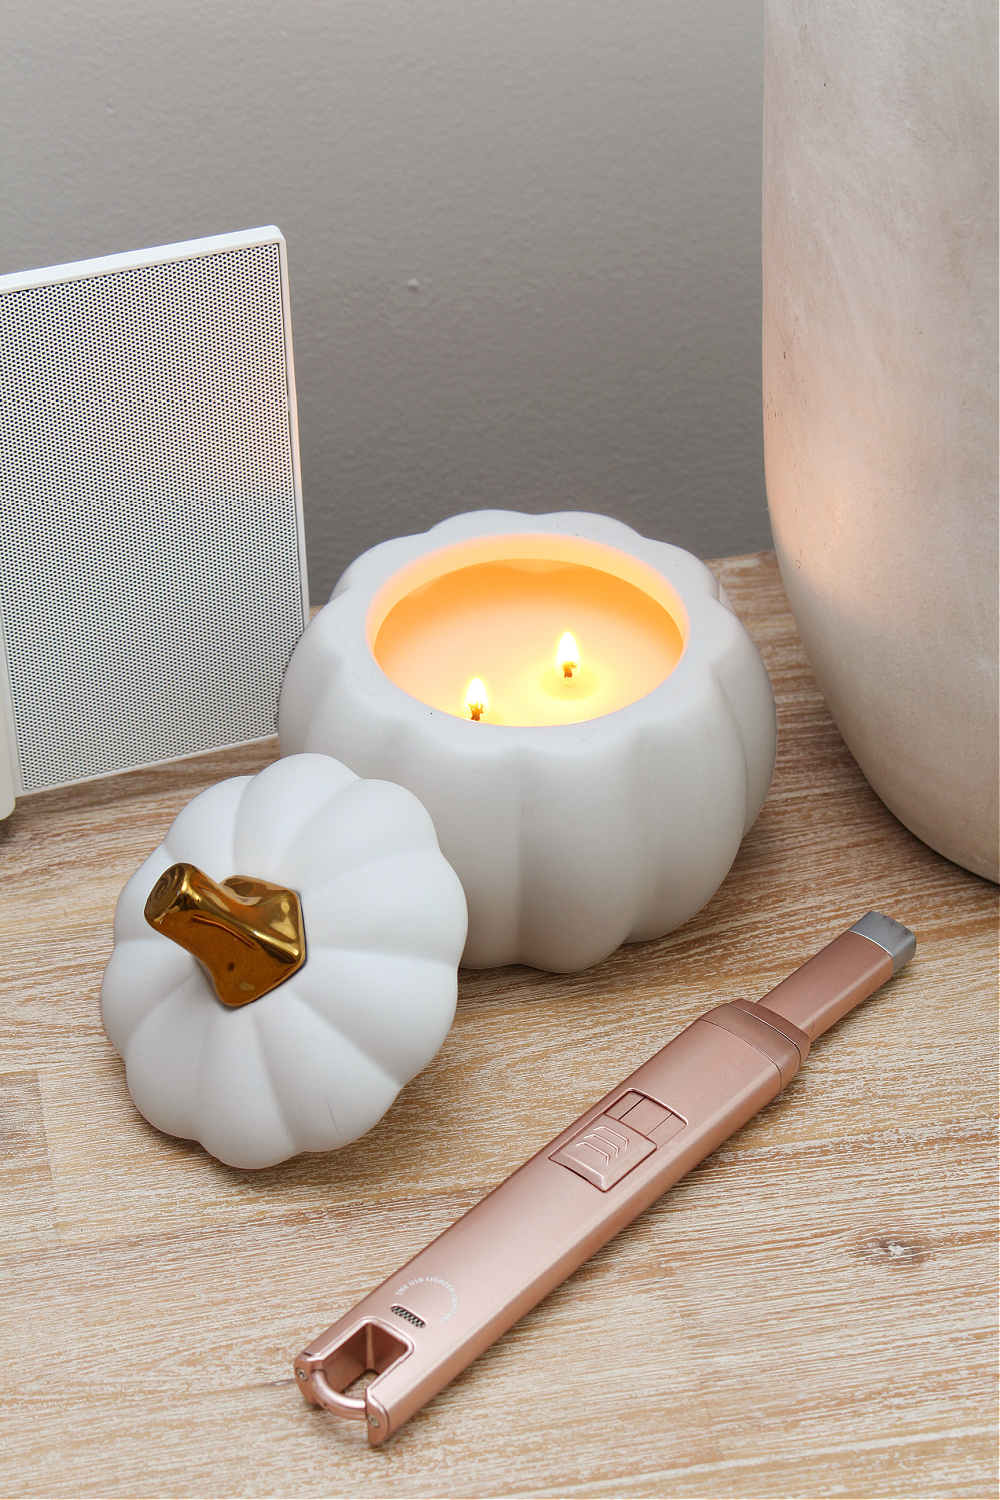 Pumpkin candle on a bedside table.